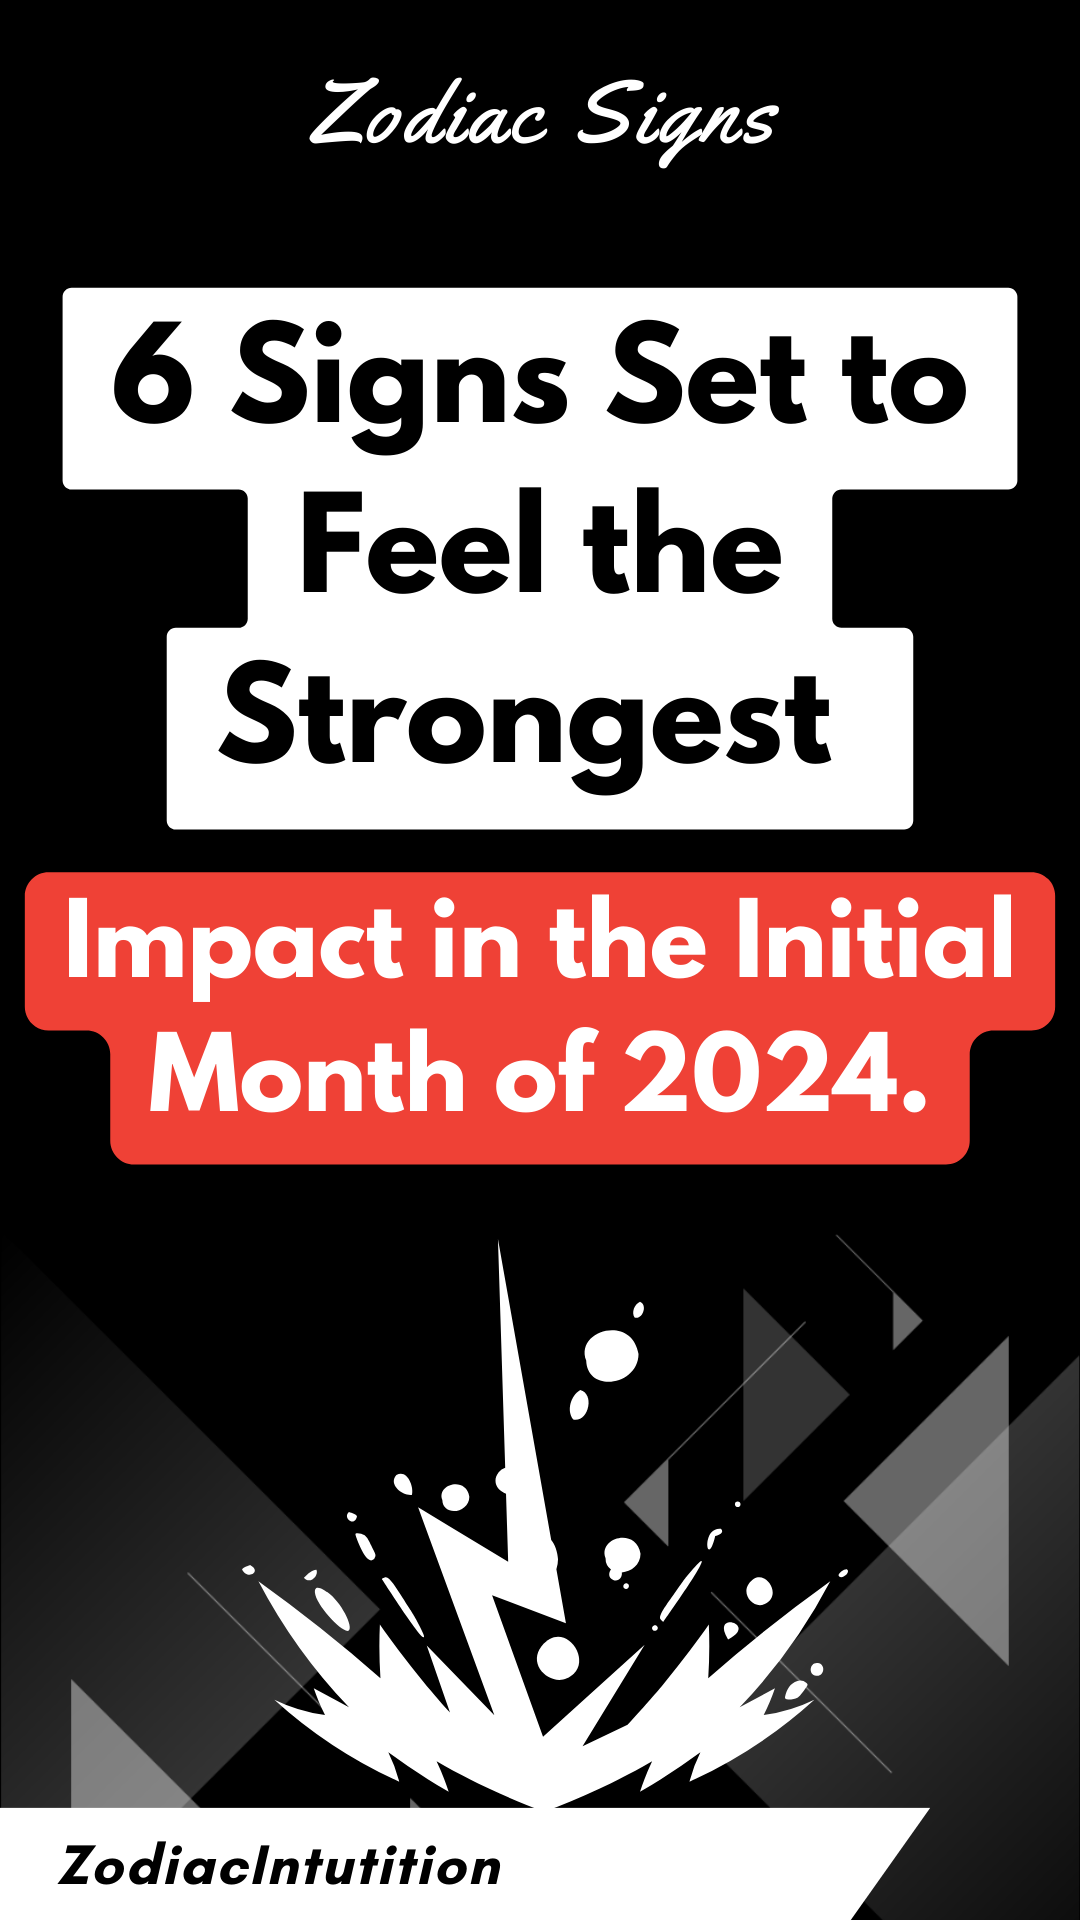 6 Signs Set to Feel the Strongest Impact in the Initial Month of 2024.